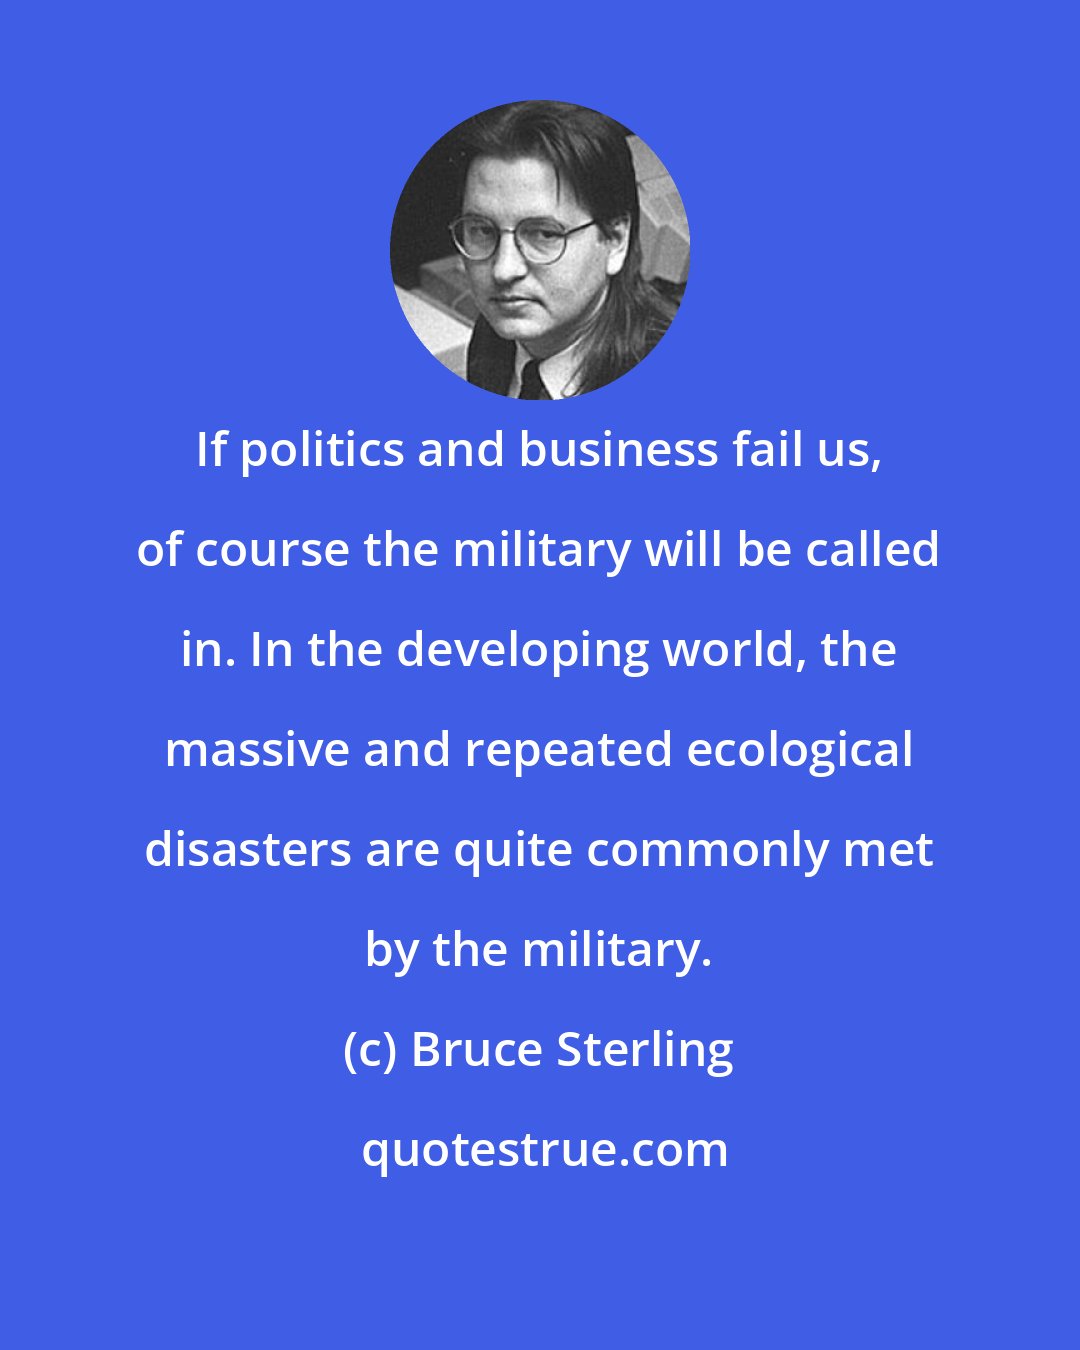 Bruce Sterling: If politics and business fail us, of course the military will be called in. In the developing world, the massive and repeated ecological disasters are quite commonly met by the military.